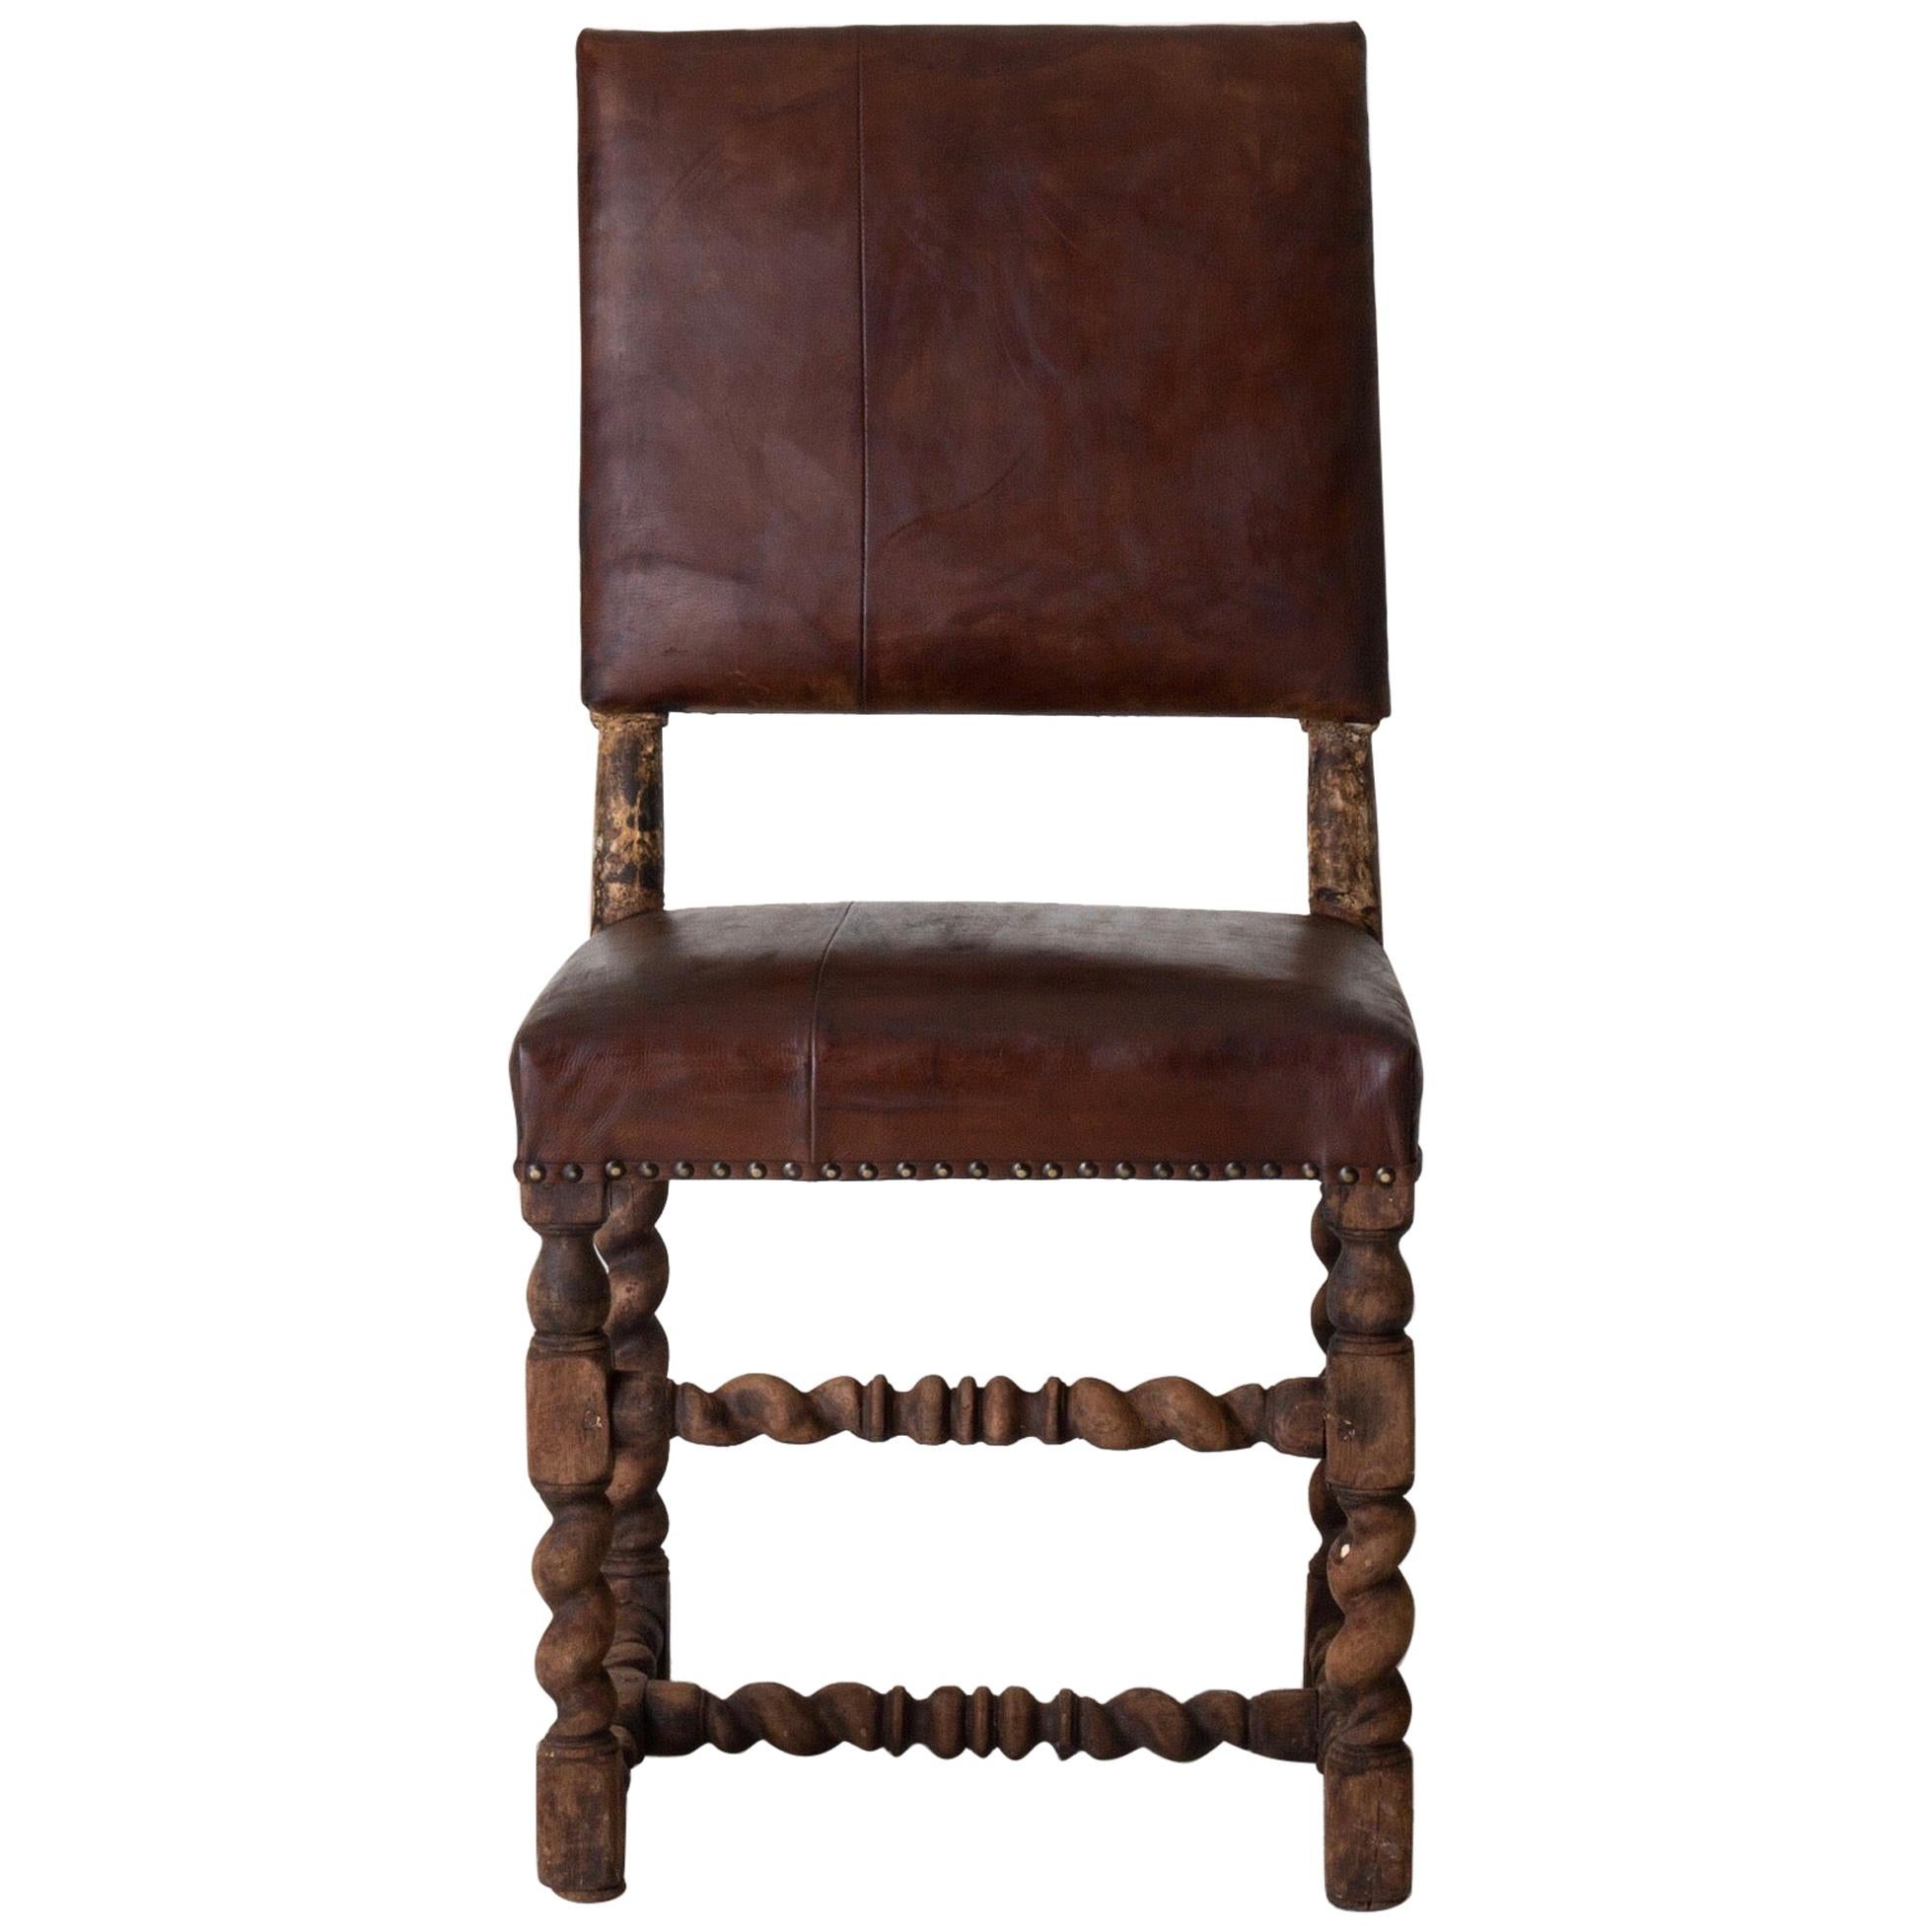 Chair Side Swedish Baroque 1650-1750 Brown Leather Sweden